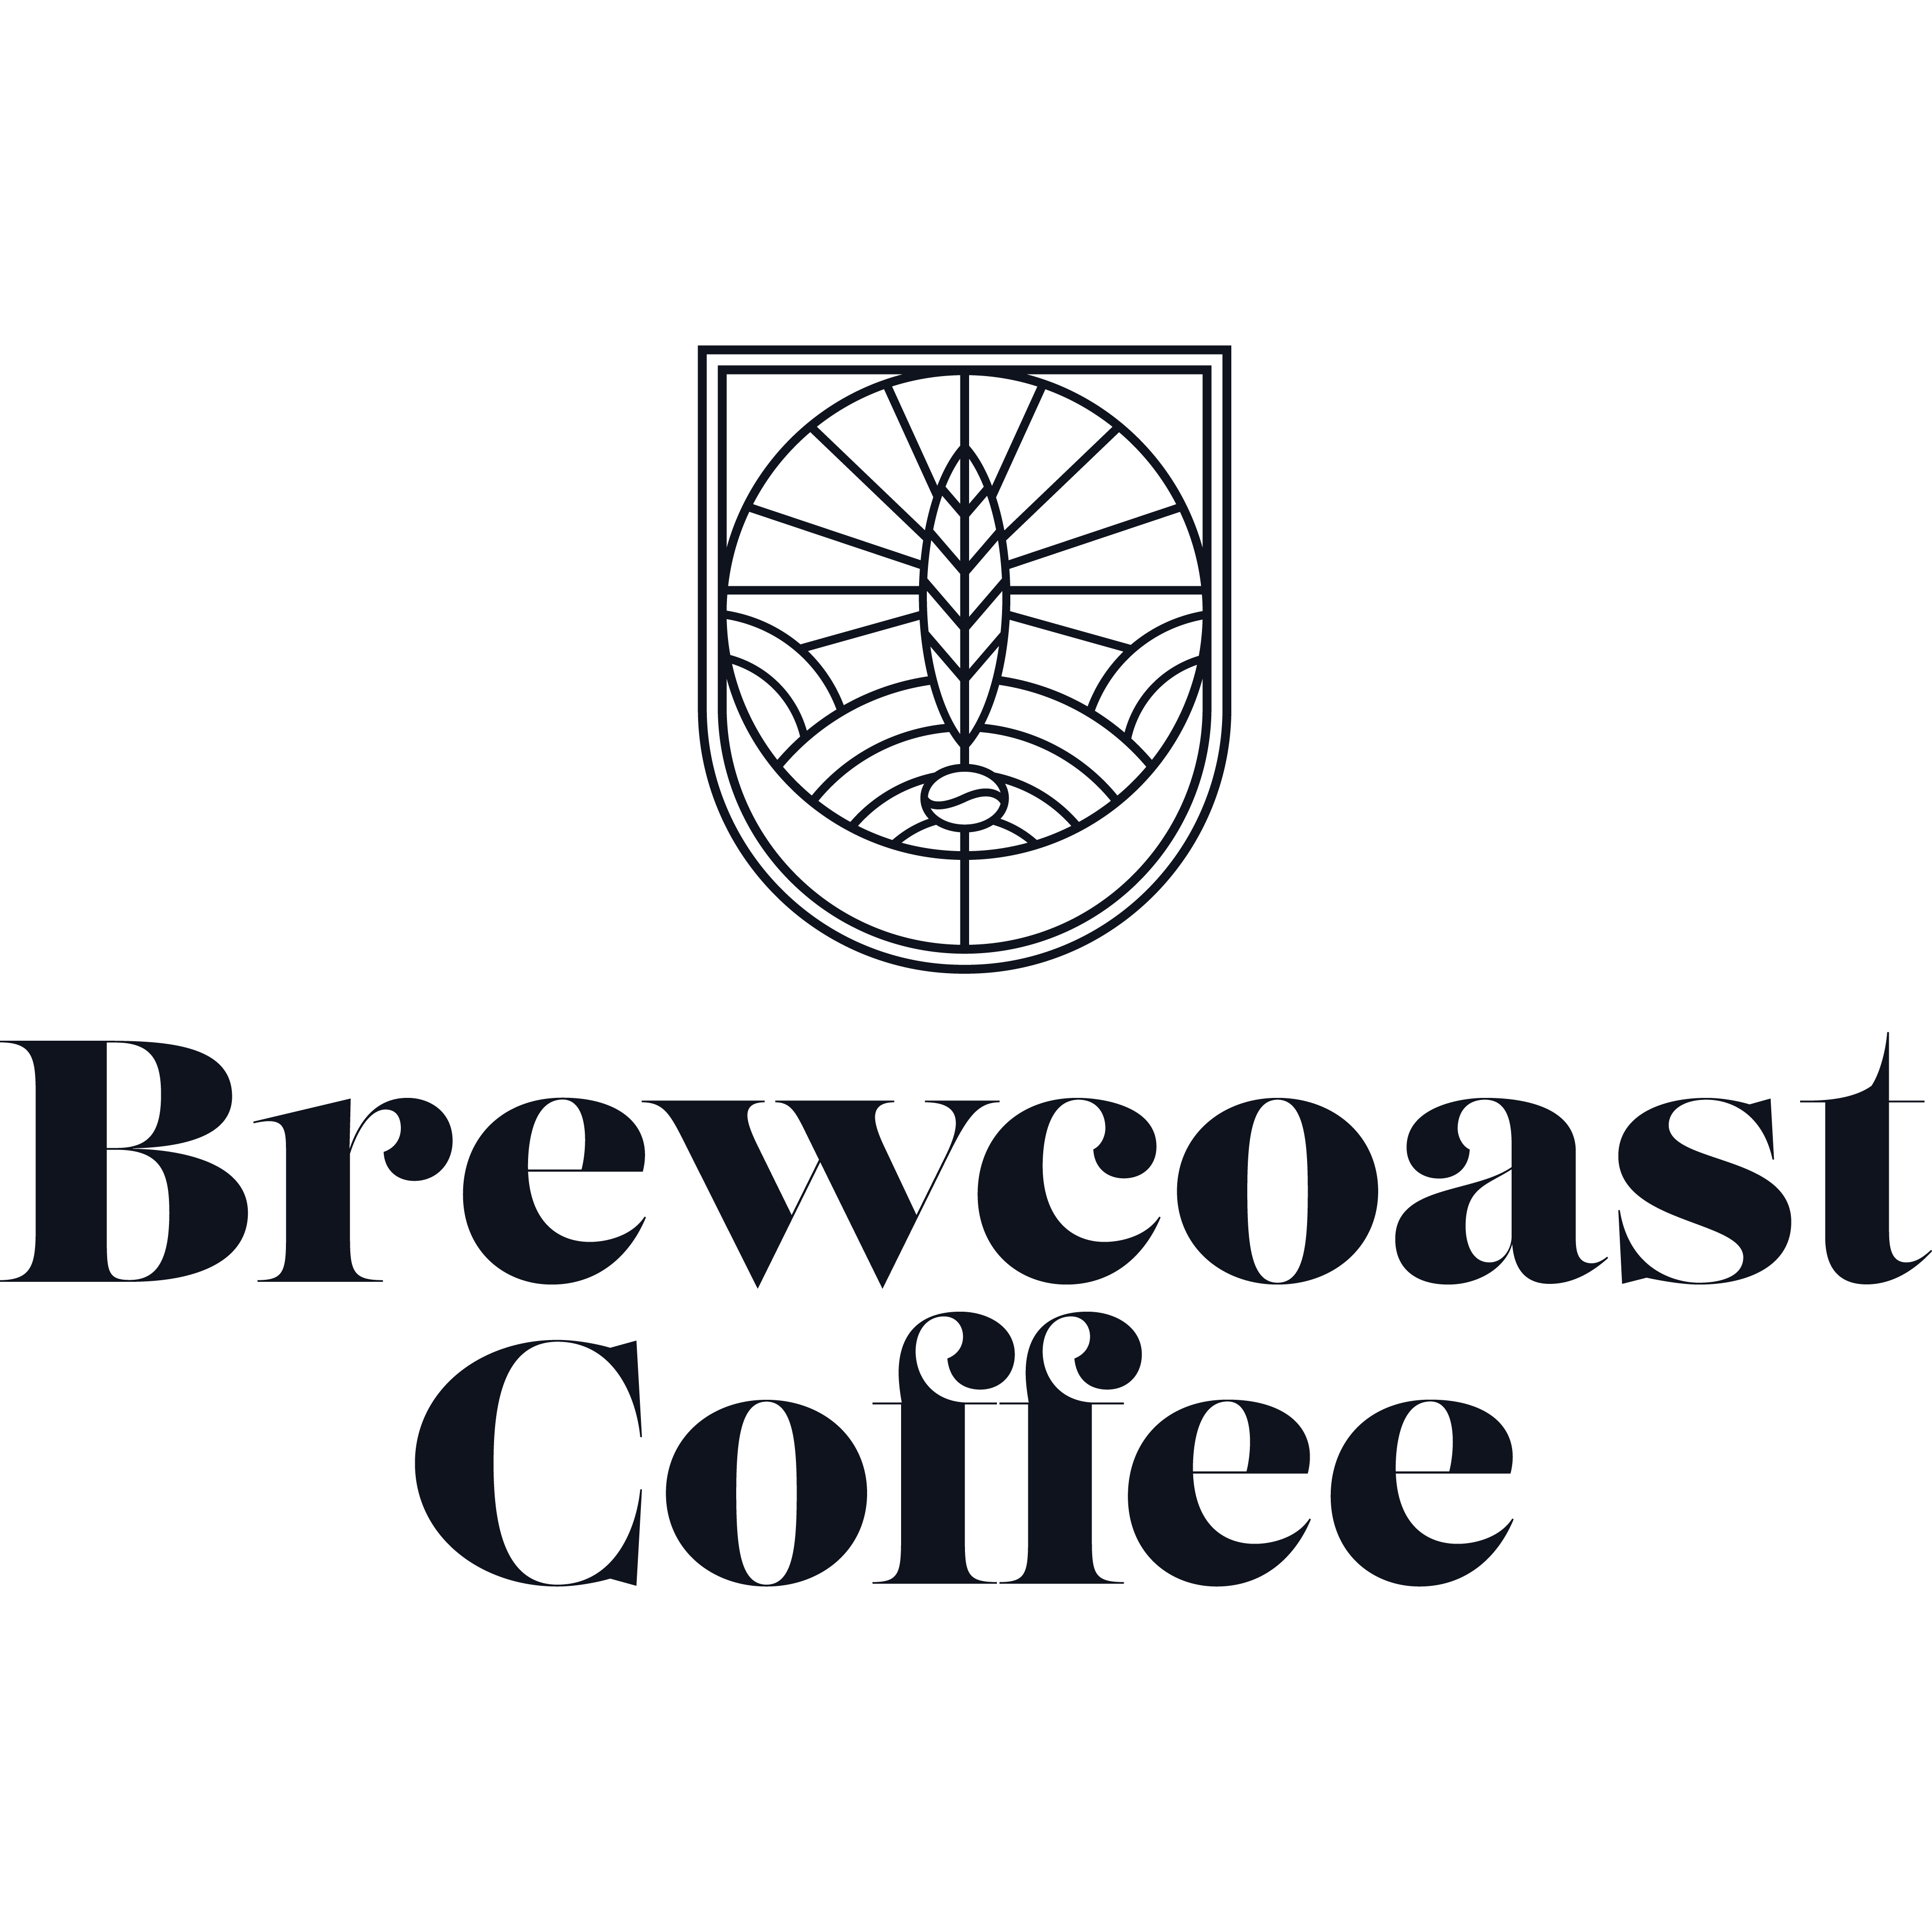 Brewcoast Coffee logo logo design by logo designer Daniel Fernandez for your inspiration and for the worlds largest logo competition